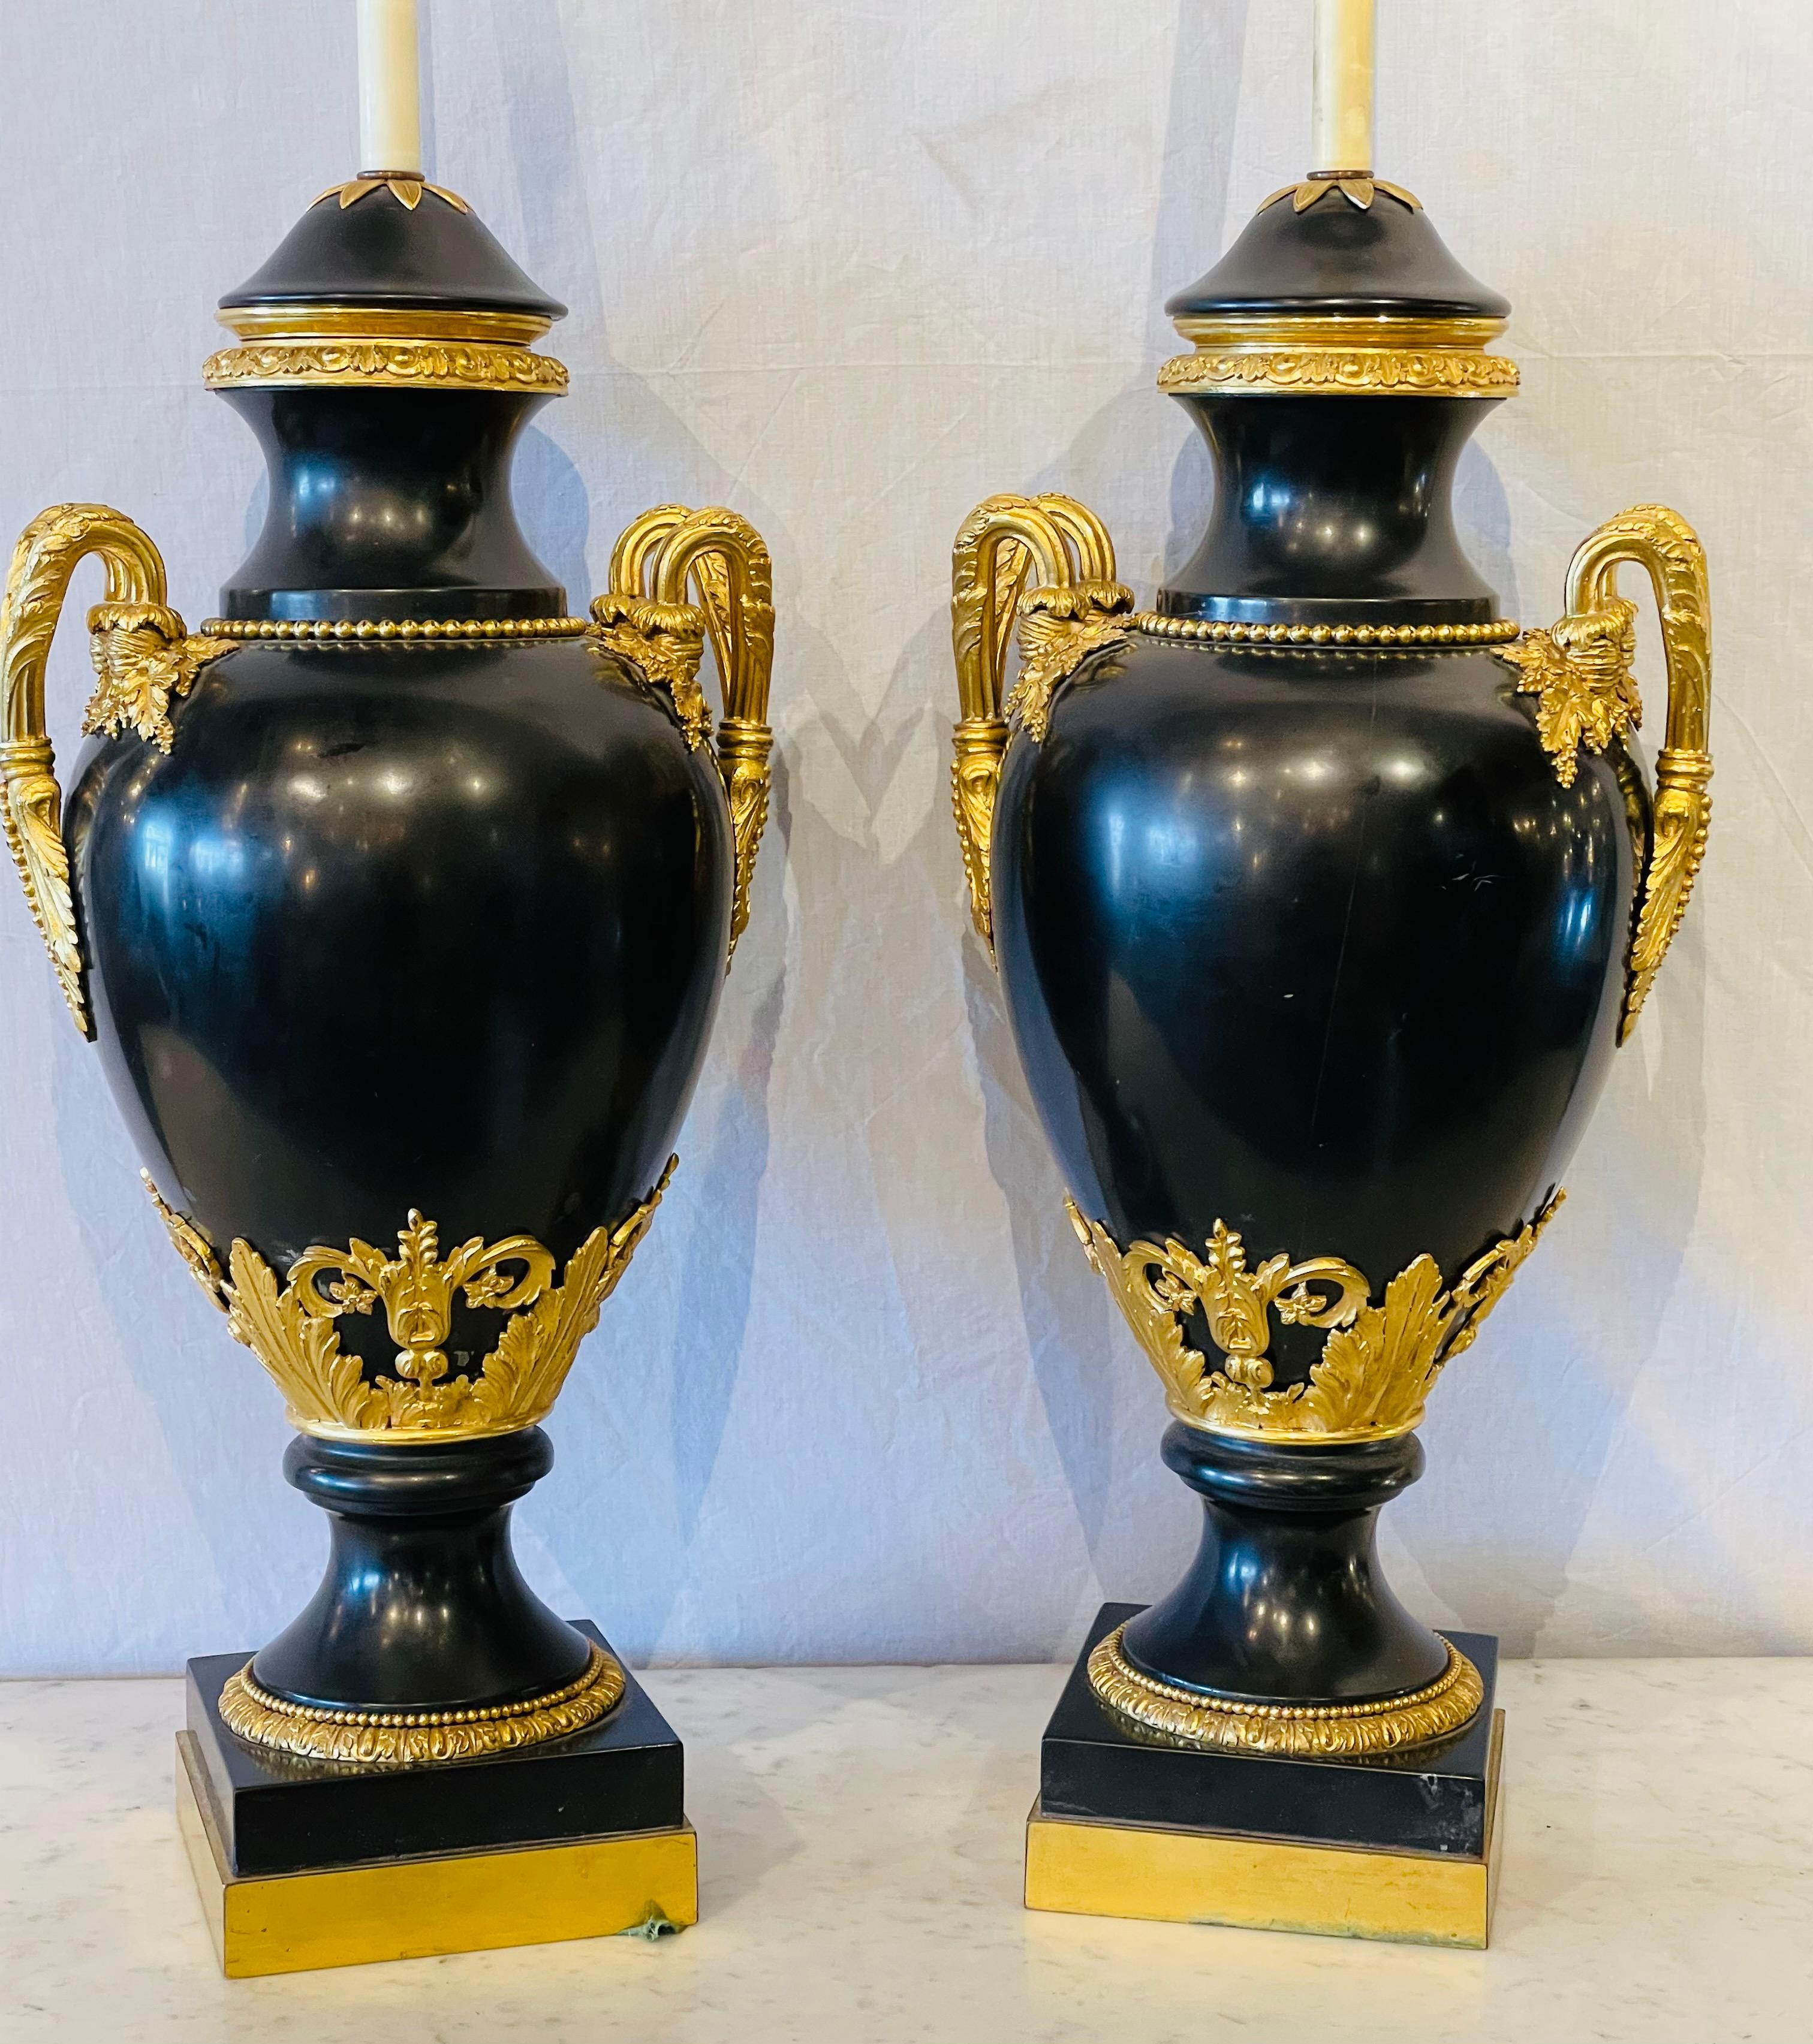 French Pair of 19th Century Doré and Black Marble Table Lamps or Urns